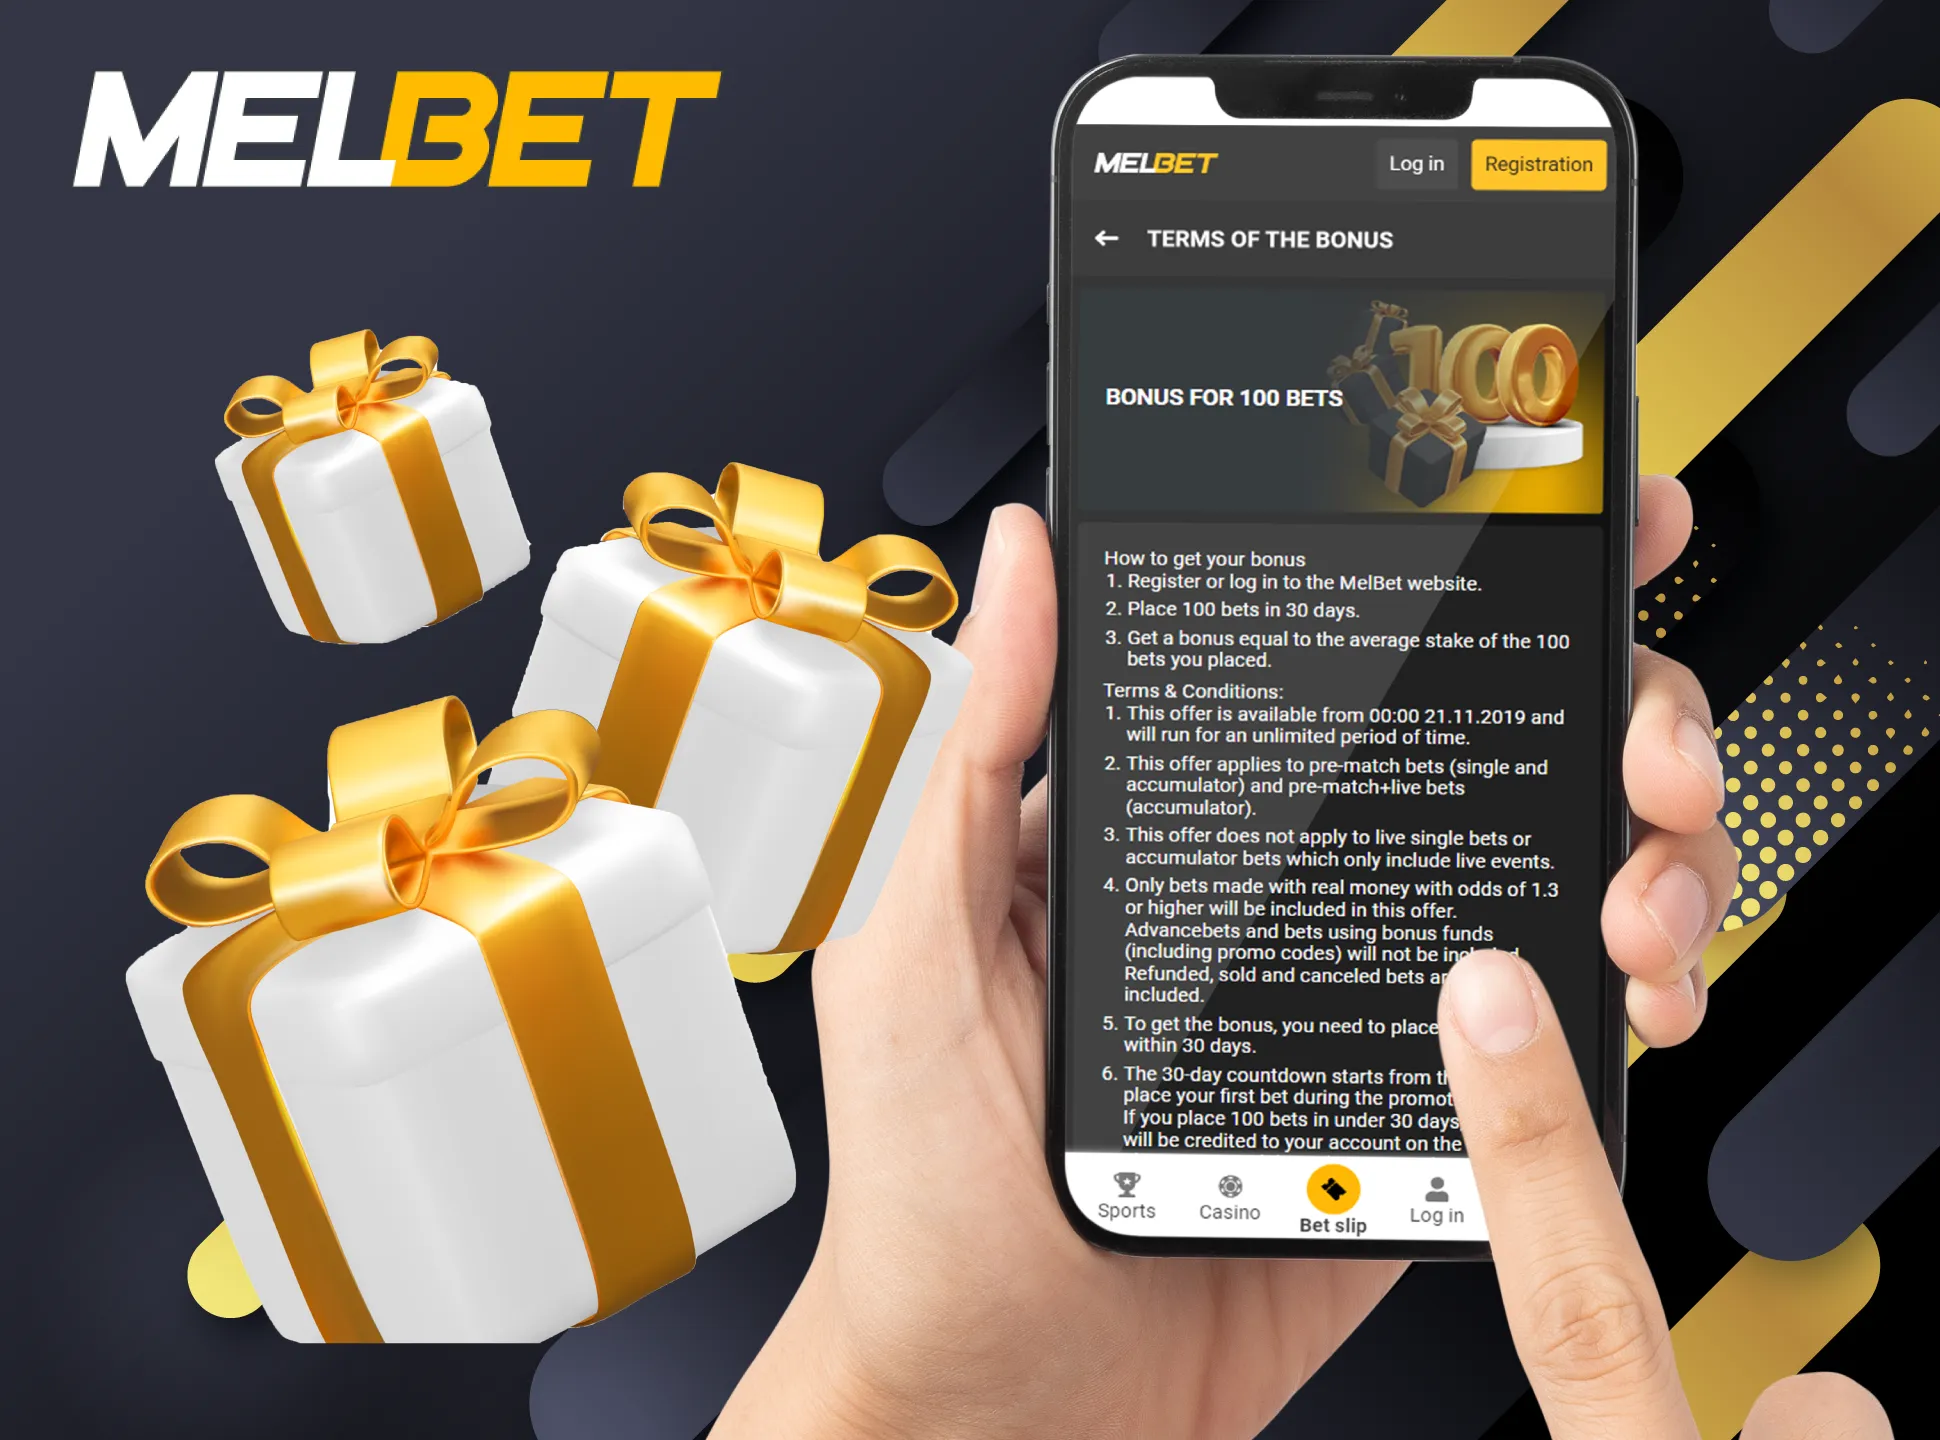 Register on Melbet and top up your account to get bonuses.